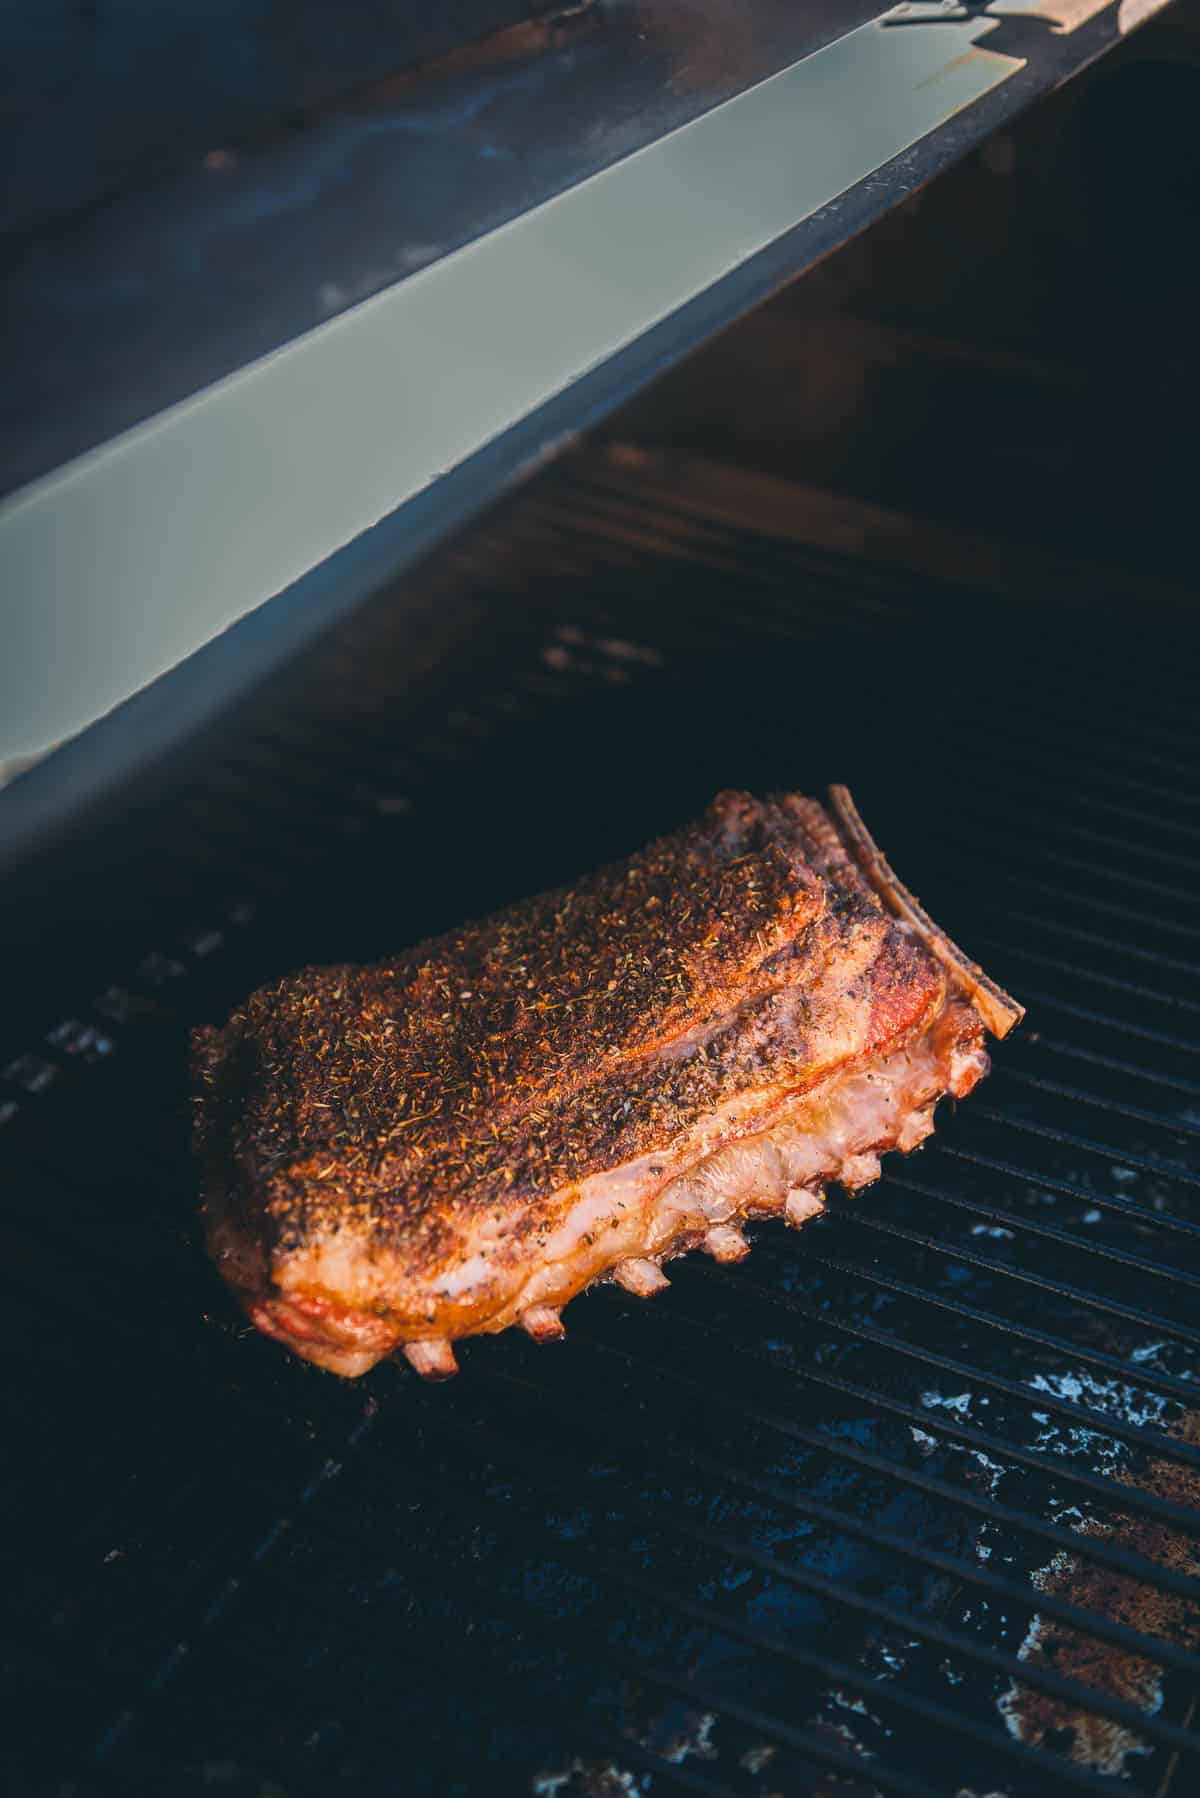 Ribs being cooked on a grill.